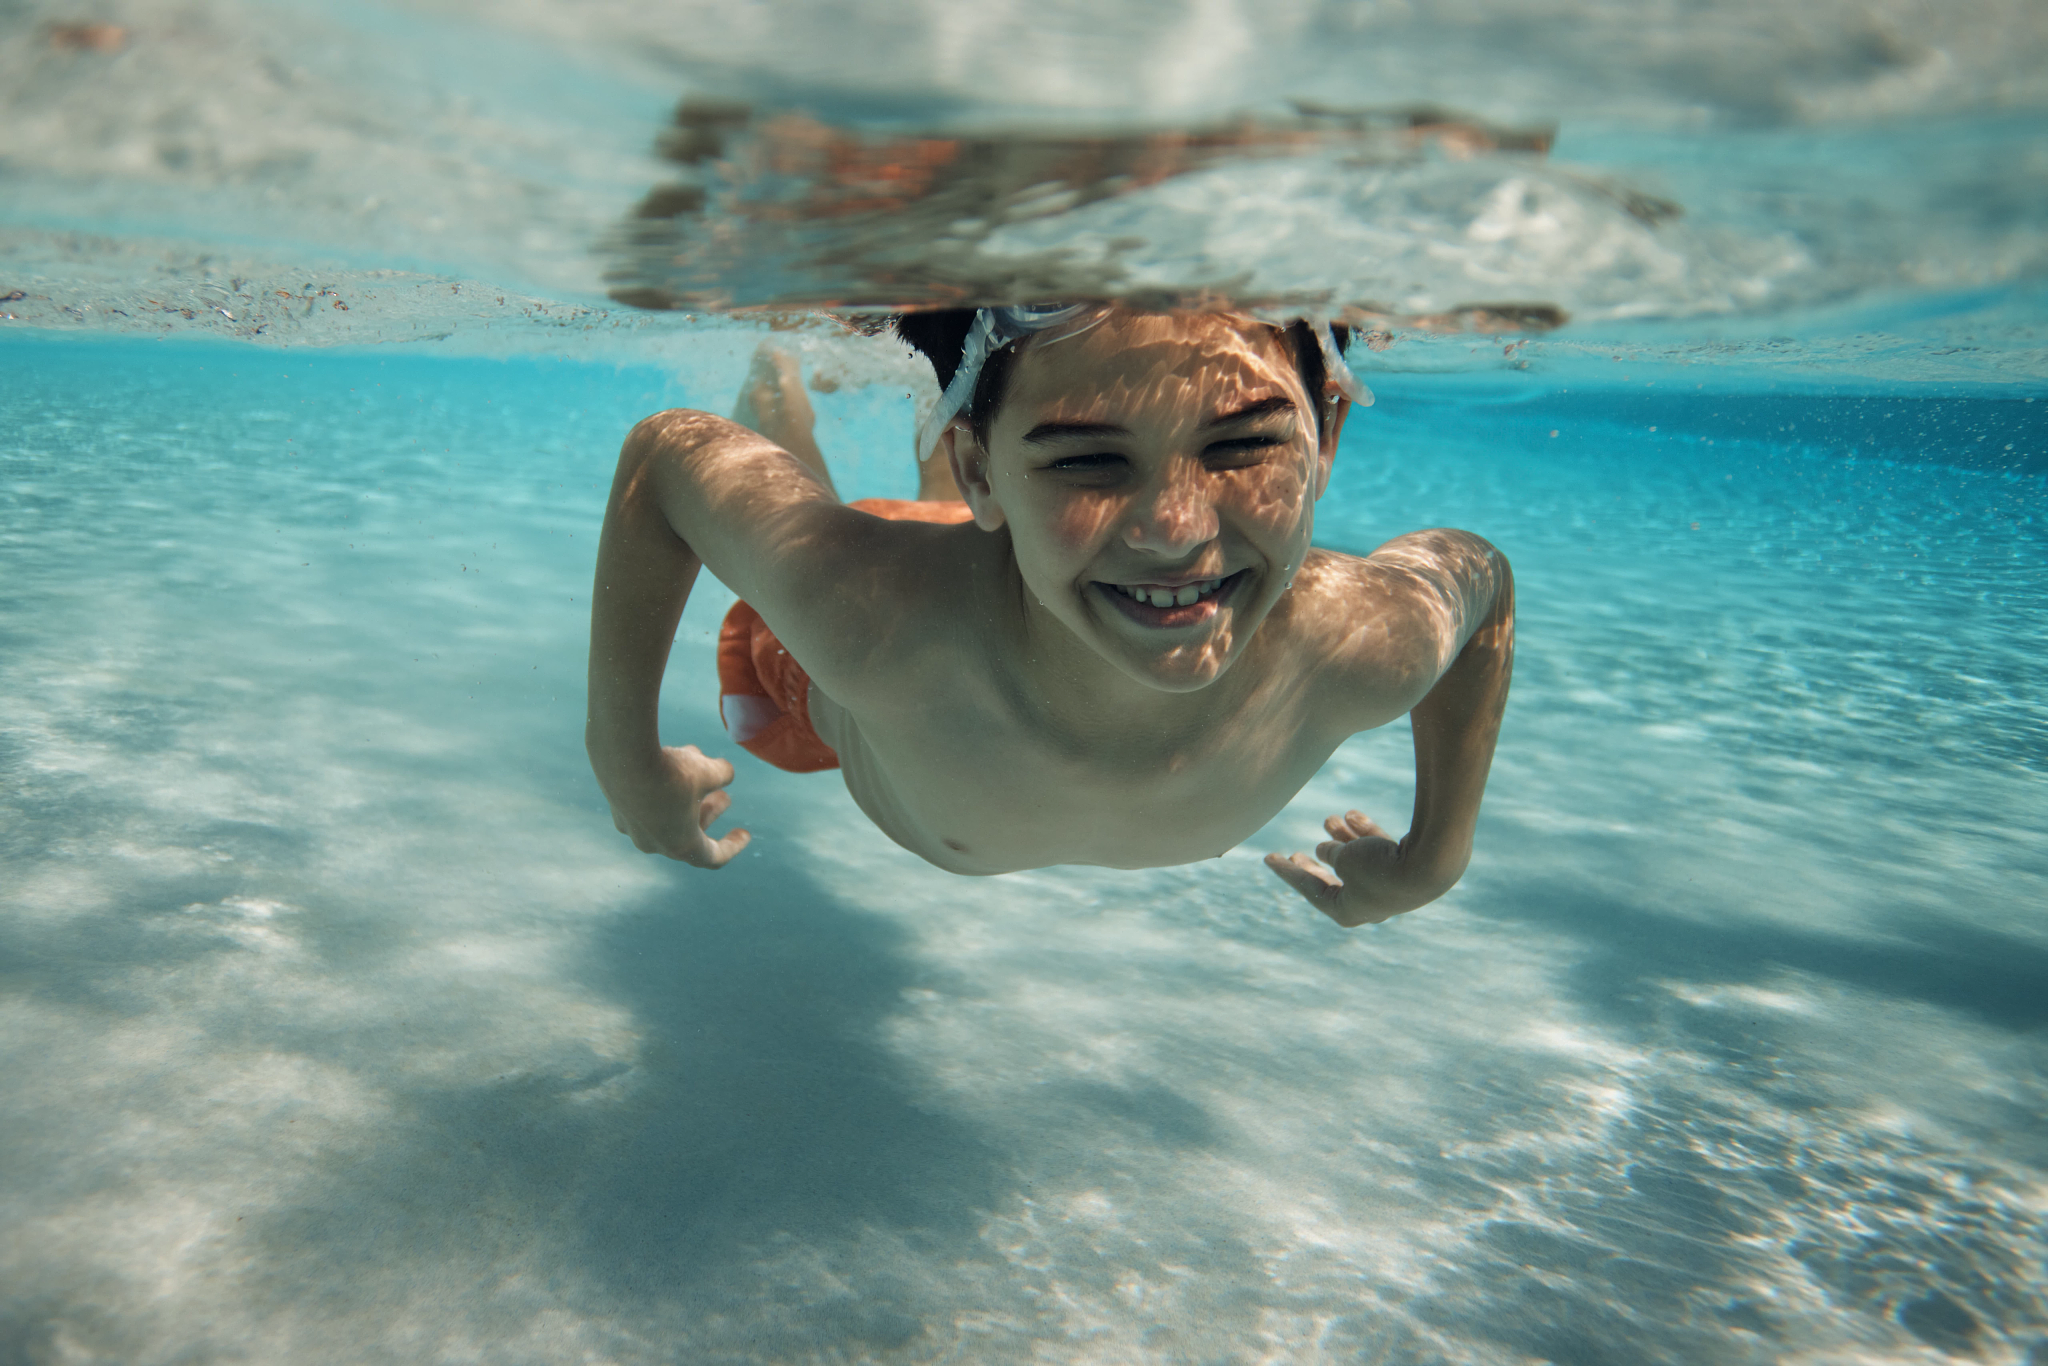 A young boy smiling underwater swimming towards the camera